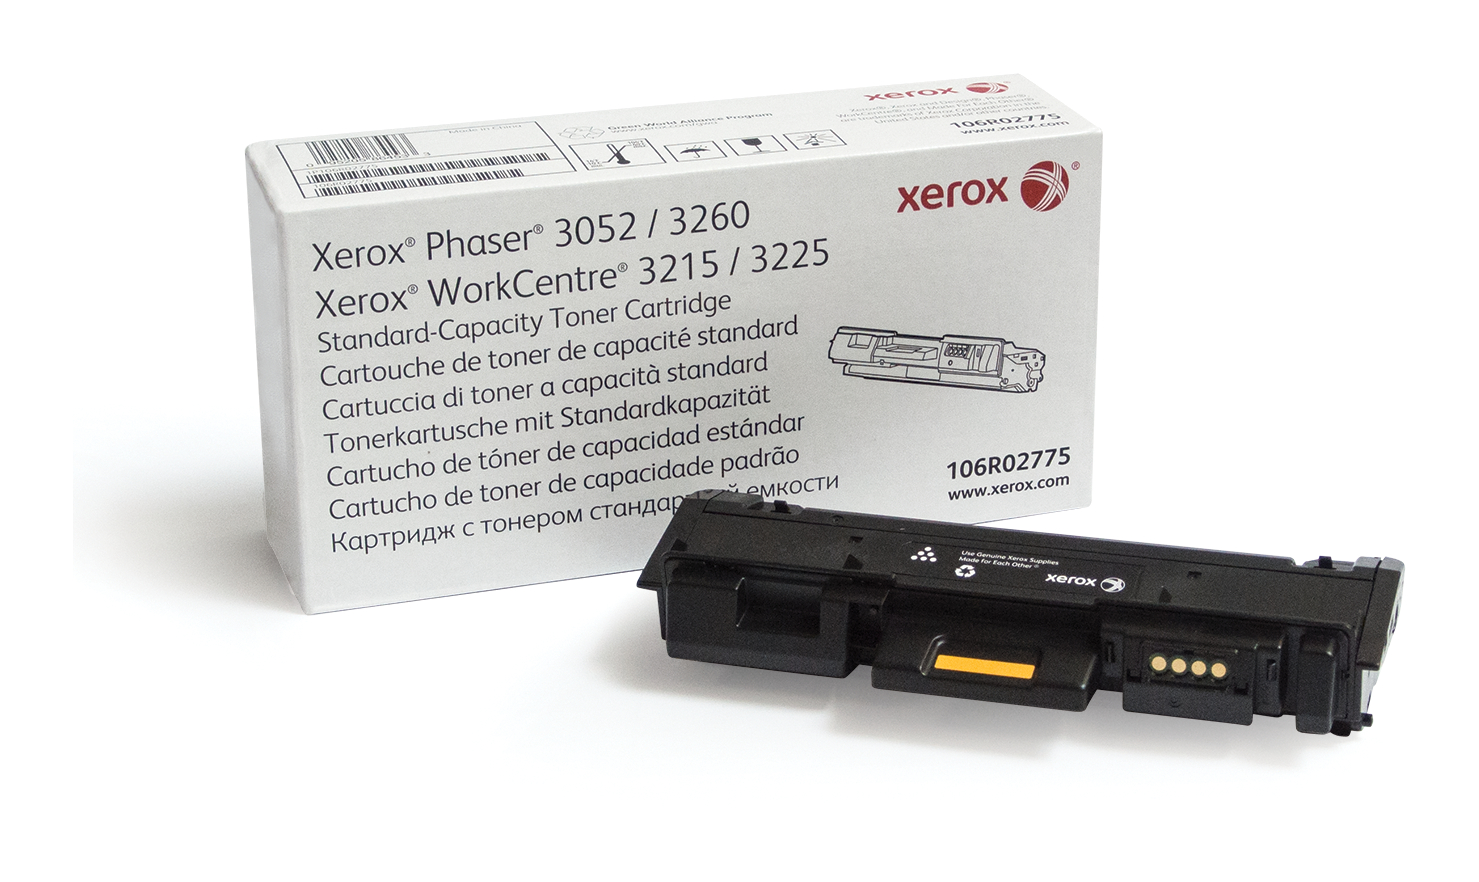 Black, Standard Capacity Toner Cartridge, Phaser 3260/WorkCentre 3215/3225  (1,500 Pages) 106R02775 Genuine Xerox Supplies